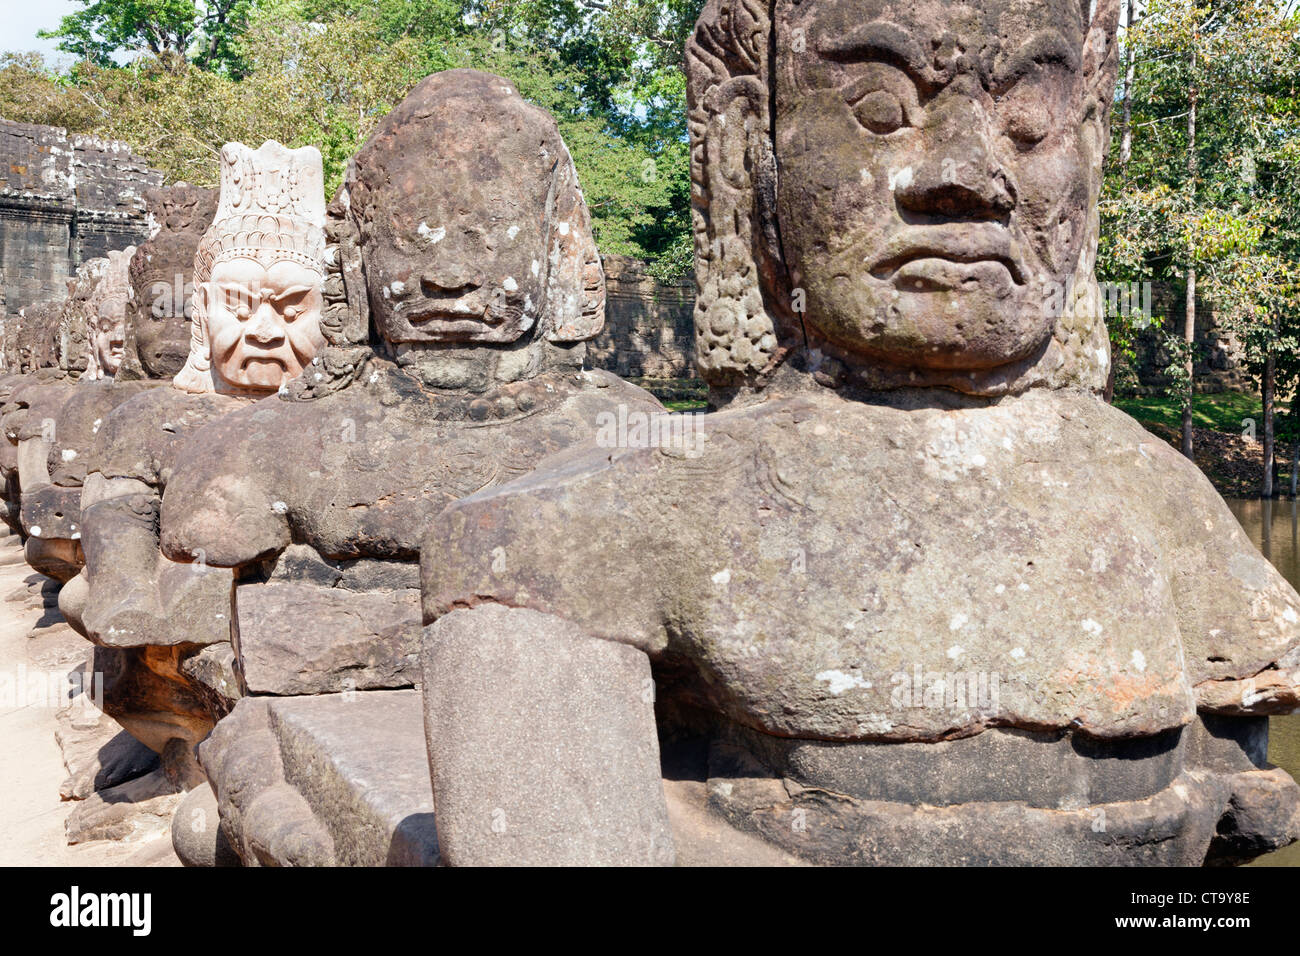 Asuras statues in Angkor Thom in Cambodia Stock Photo